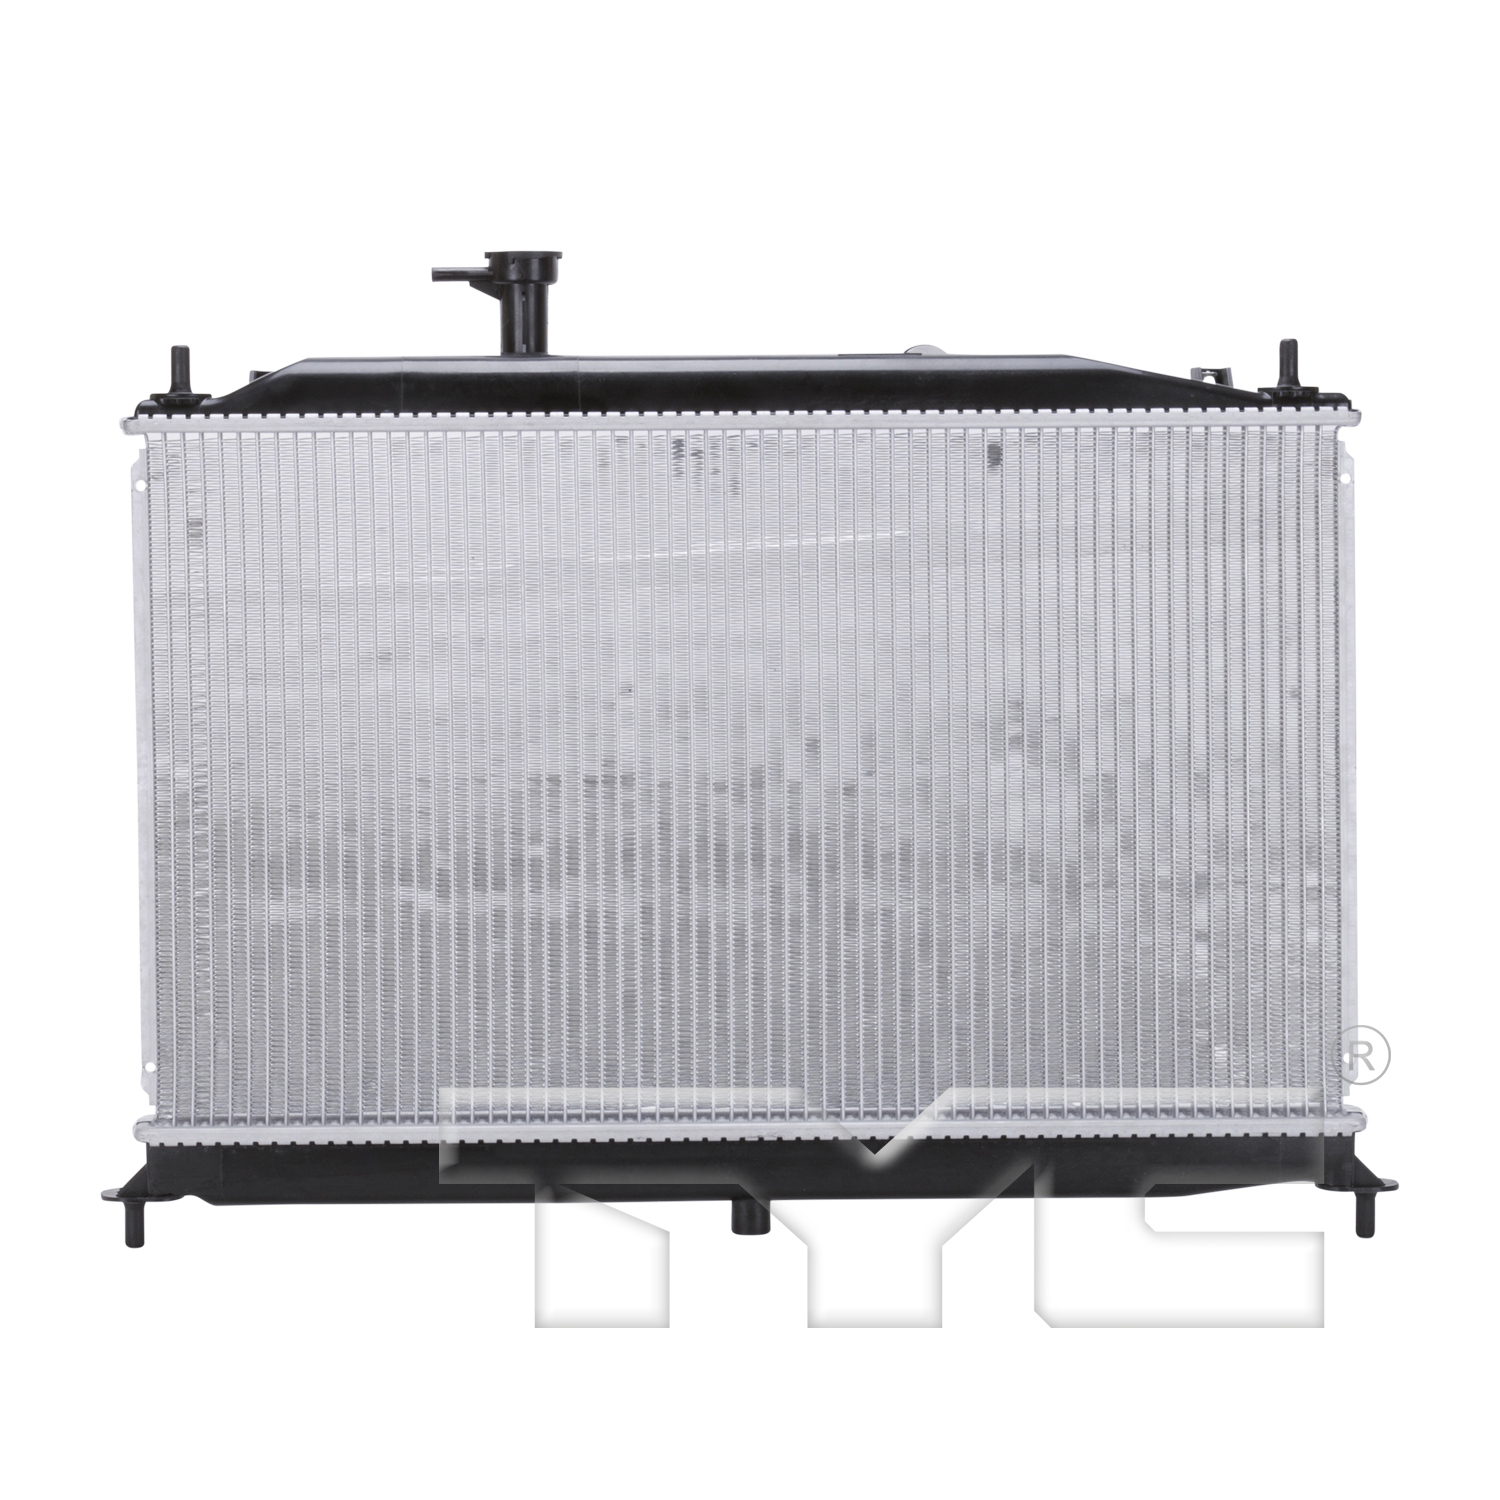 Aftermarket RADIATORS for HYUNDAI - ACCENT, ACCENT,06-11,Radiator assembly